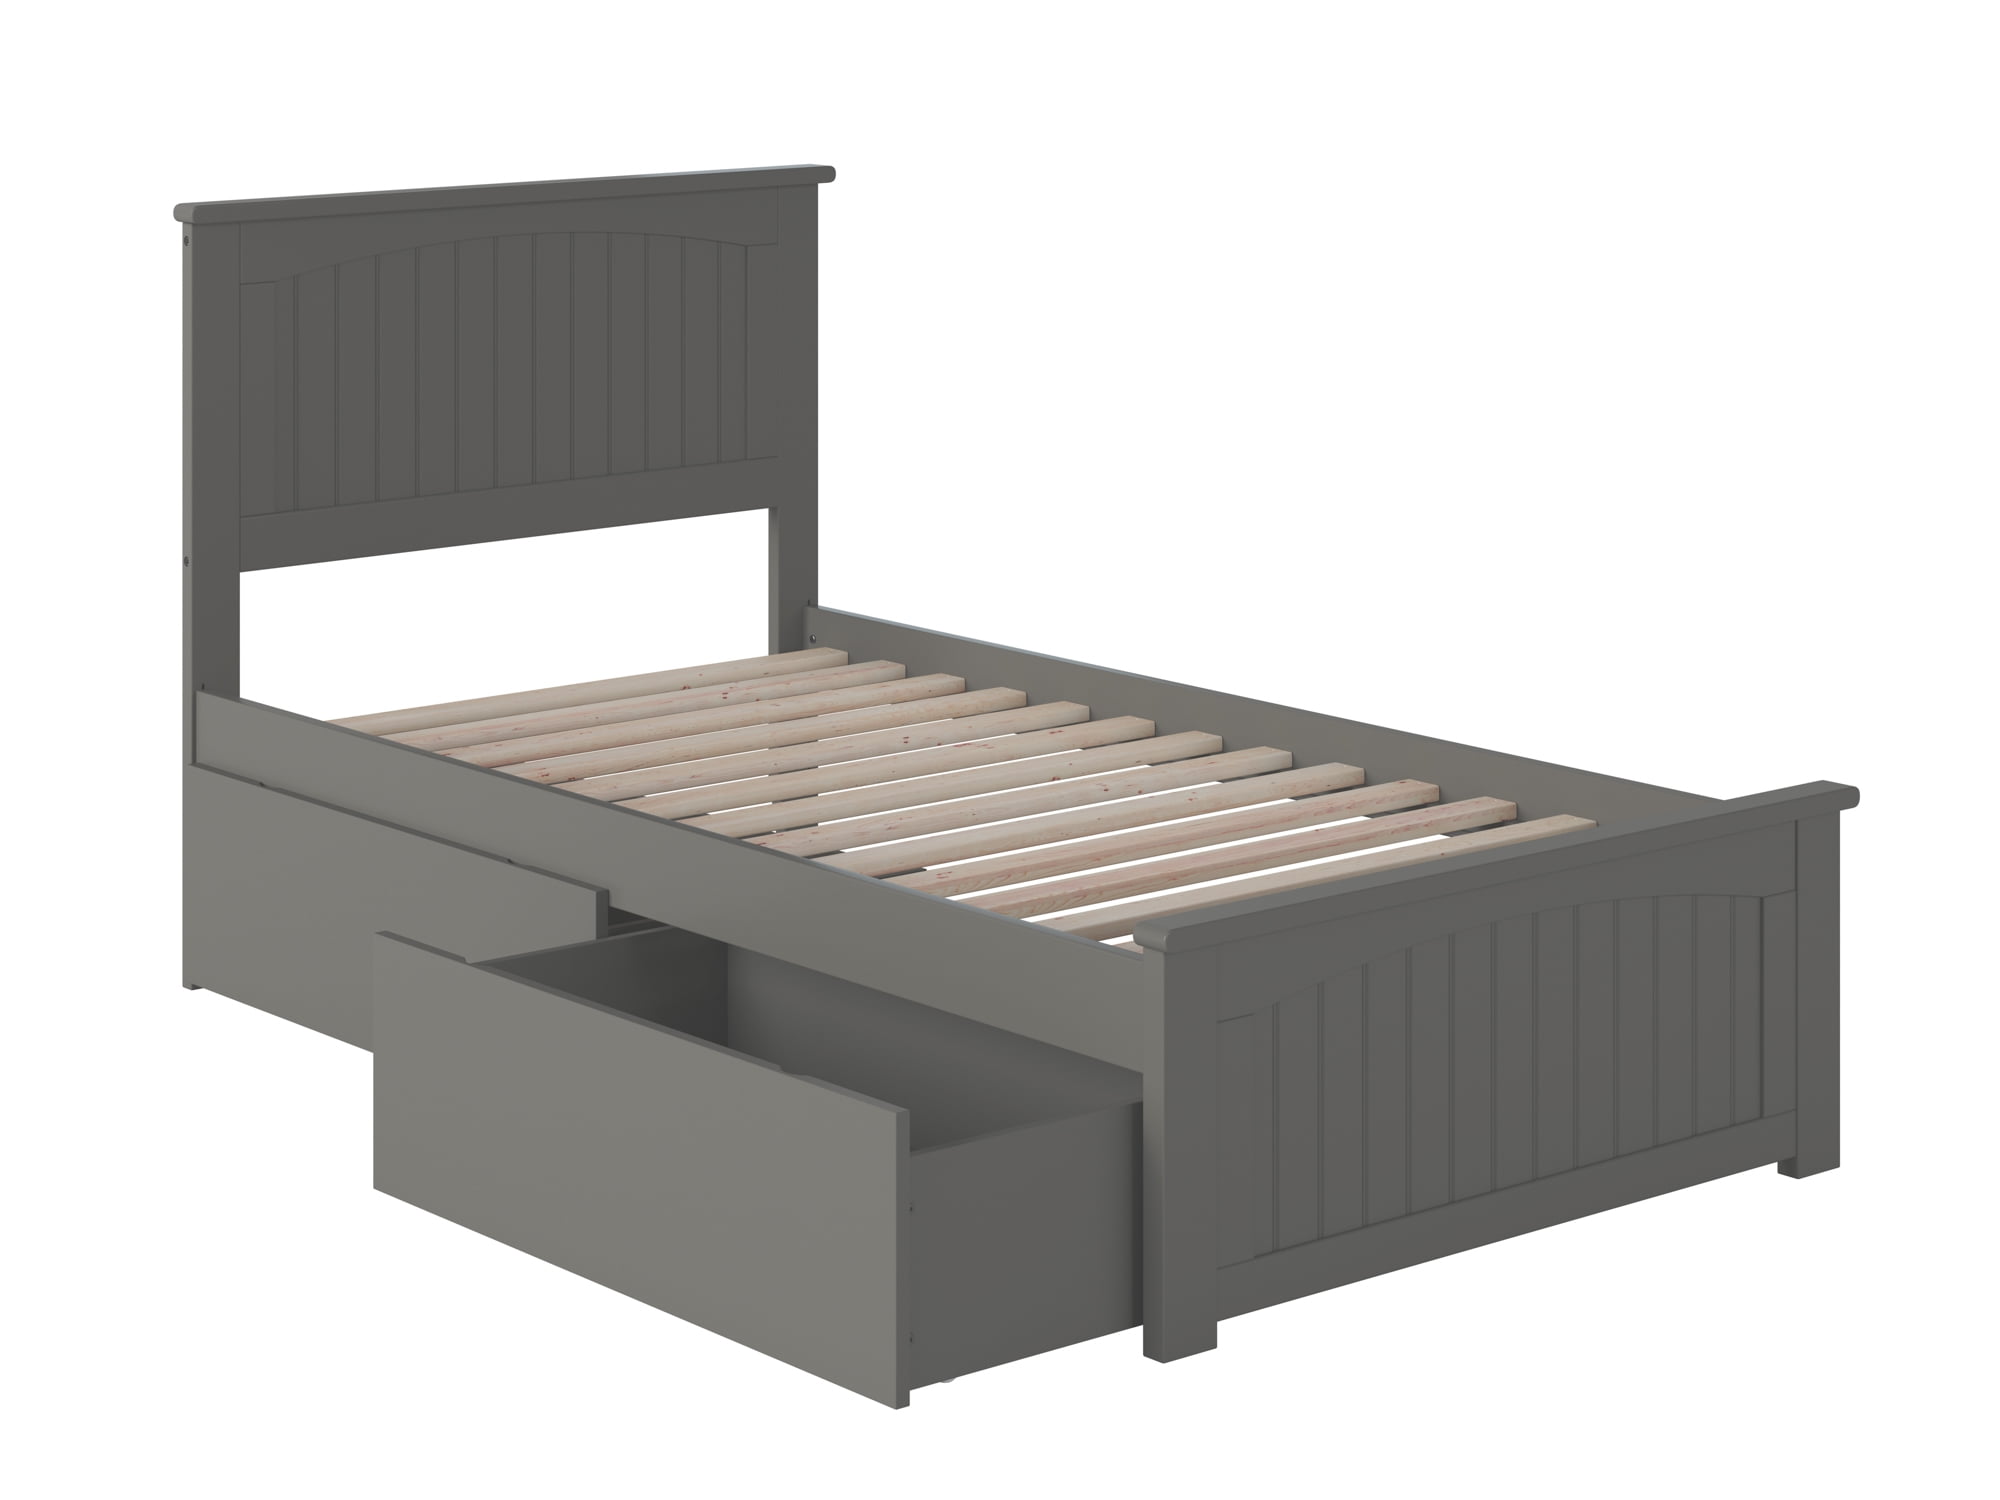 Ar8216119 Nantucket Twin Xl Platform Bed With Matching Foot Board With 2 Urban Bed Drawers - Grey